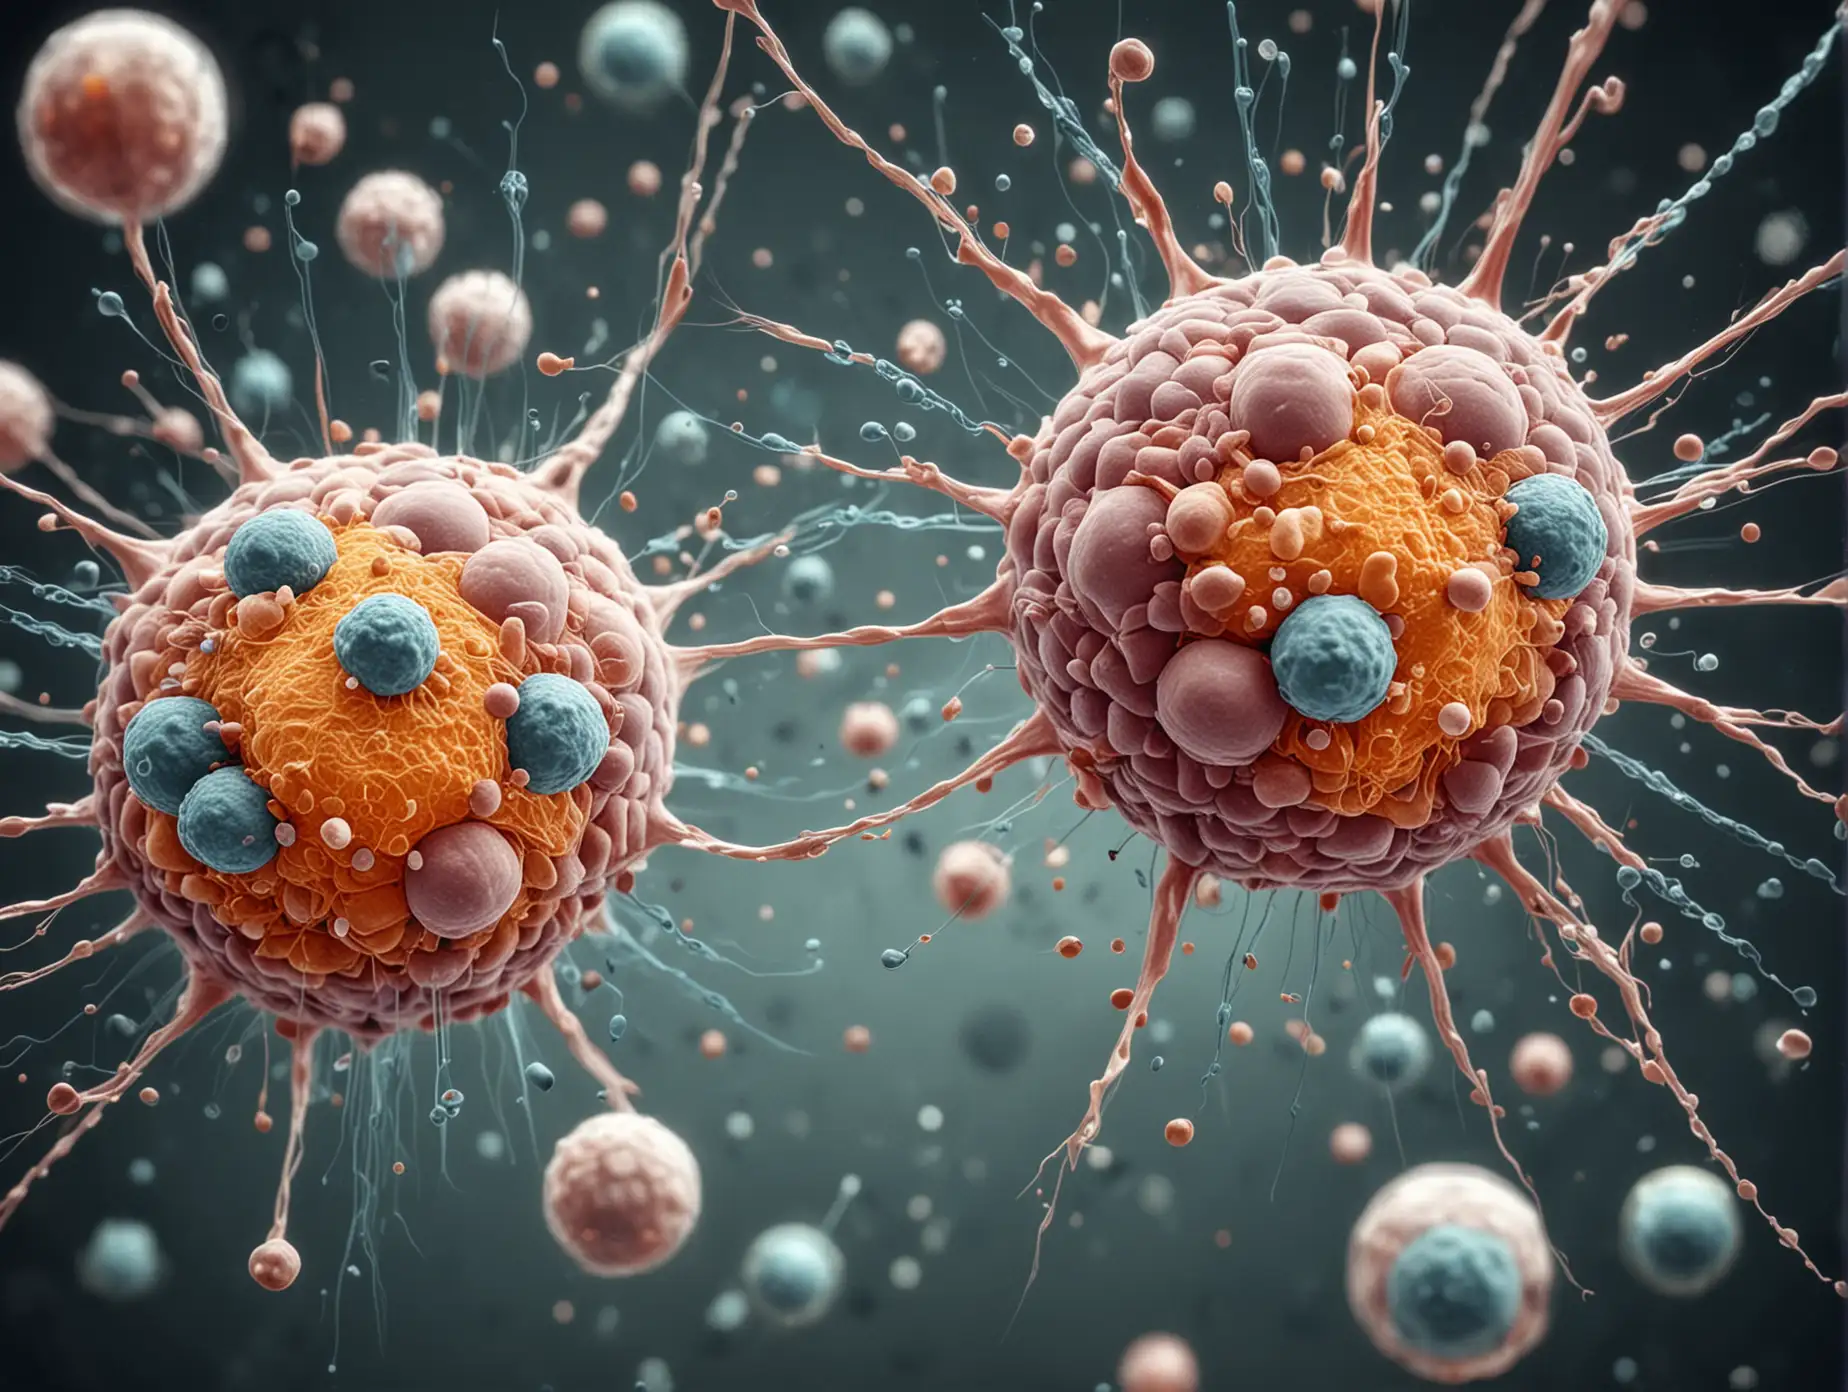 an abstract but realistic image of cells and neutrons in the human body
